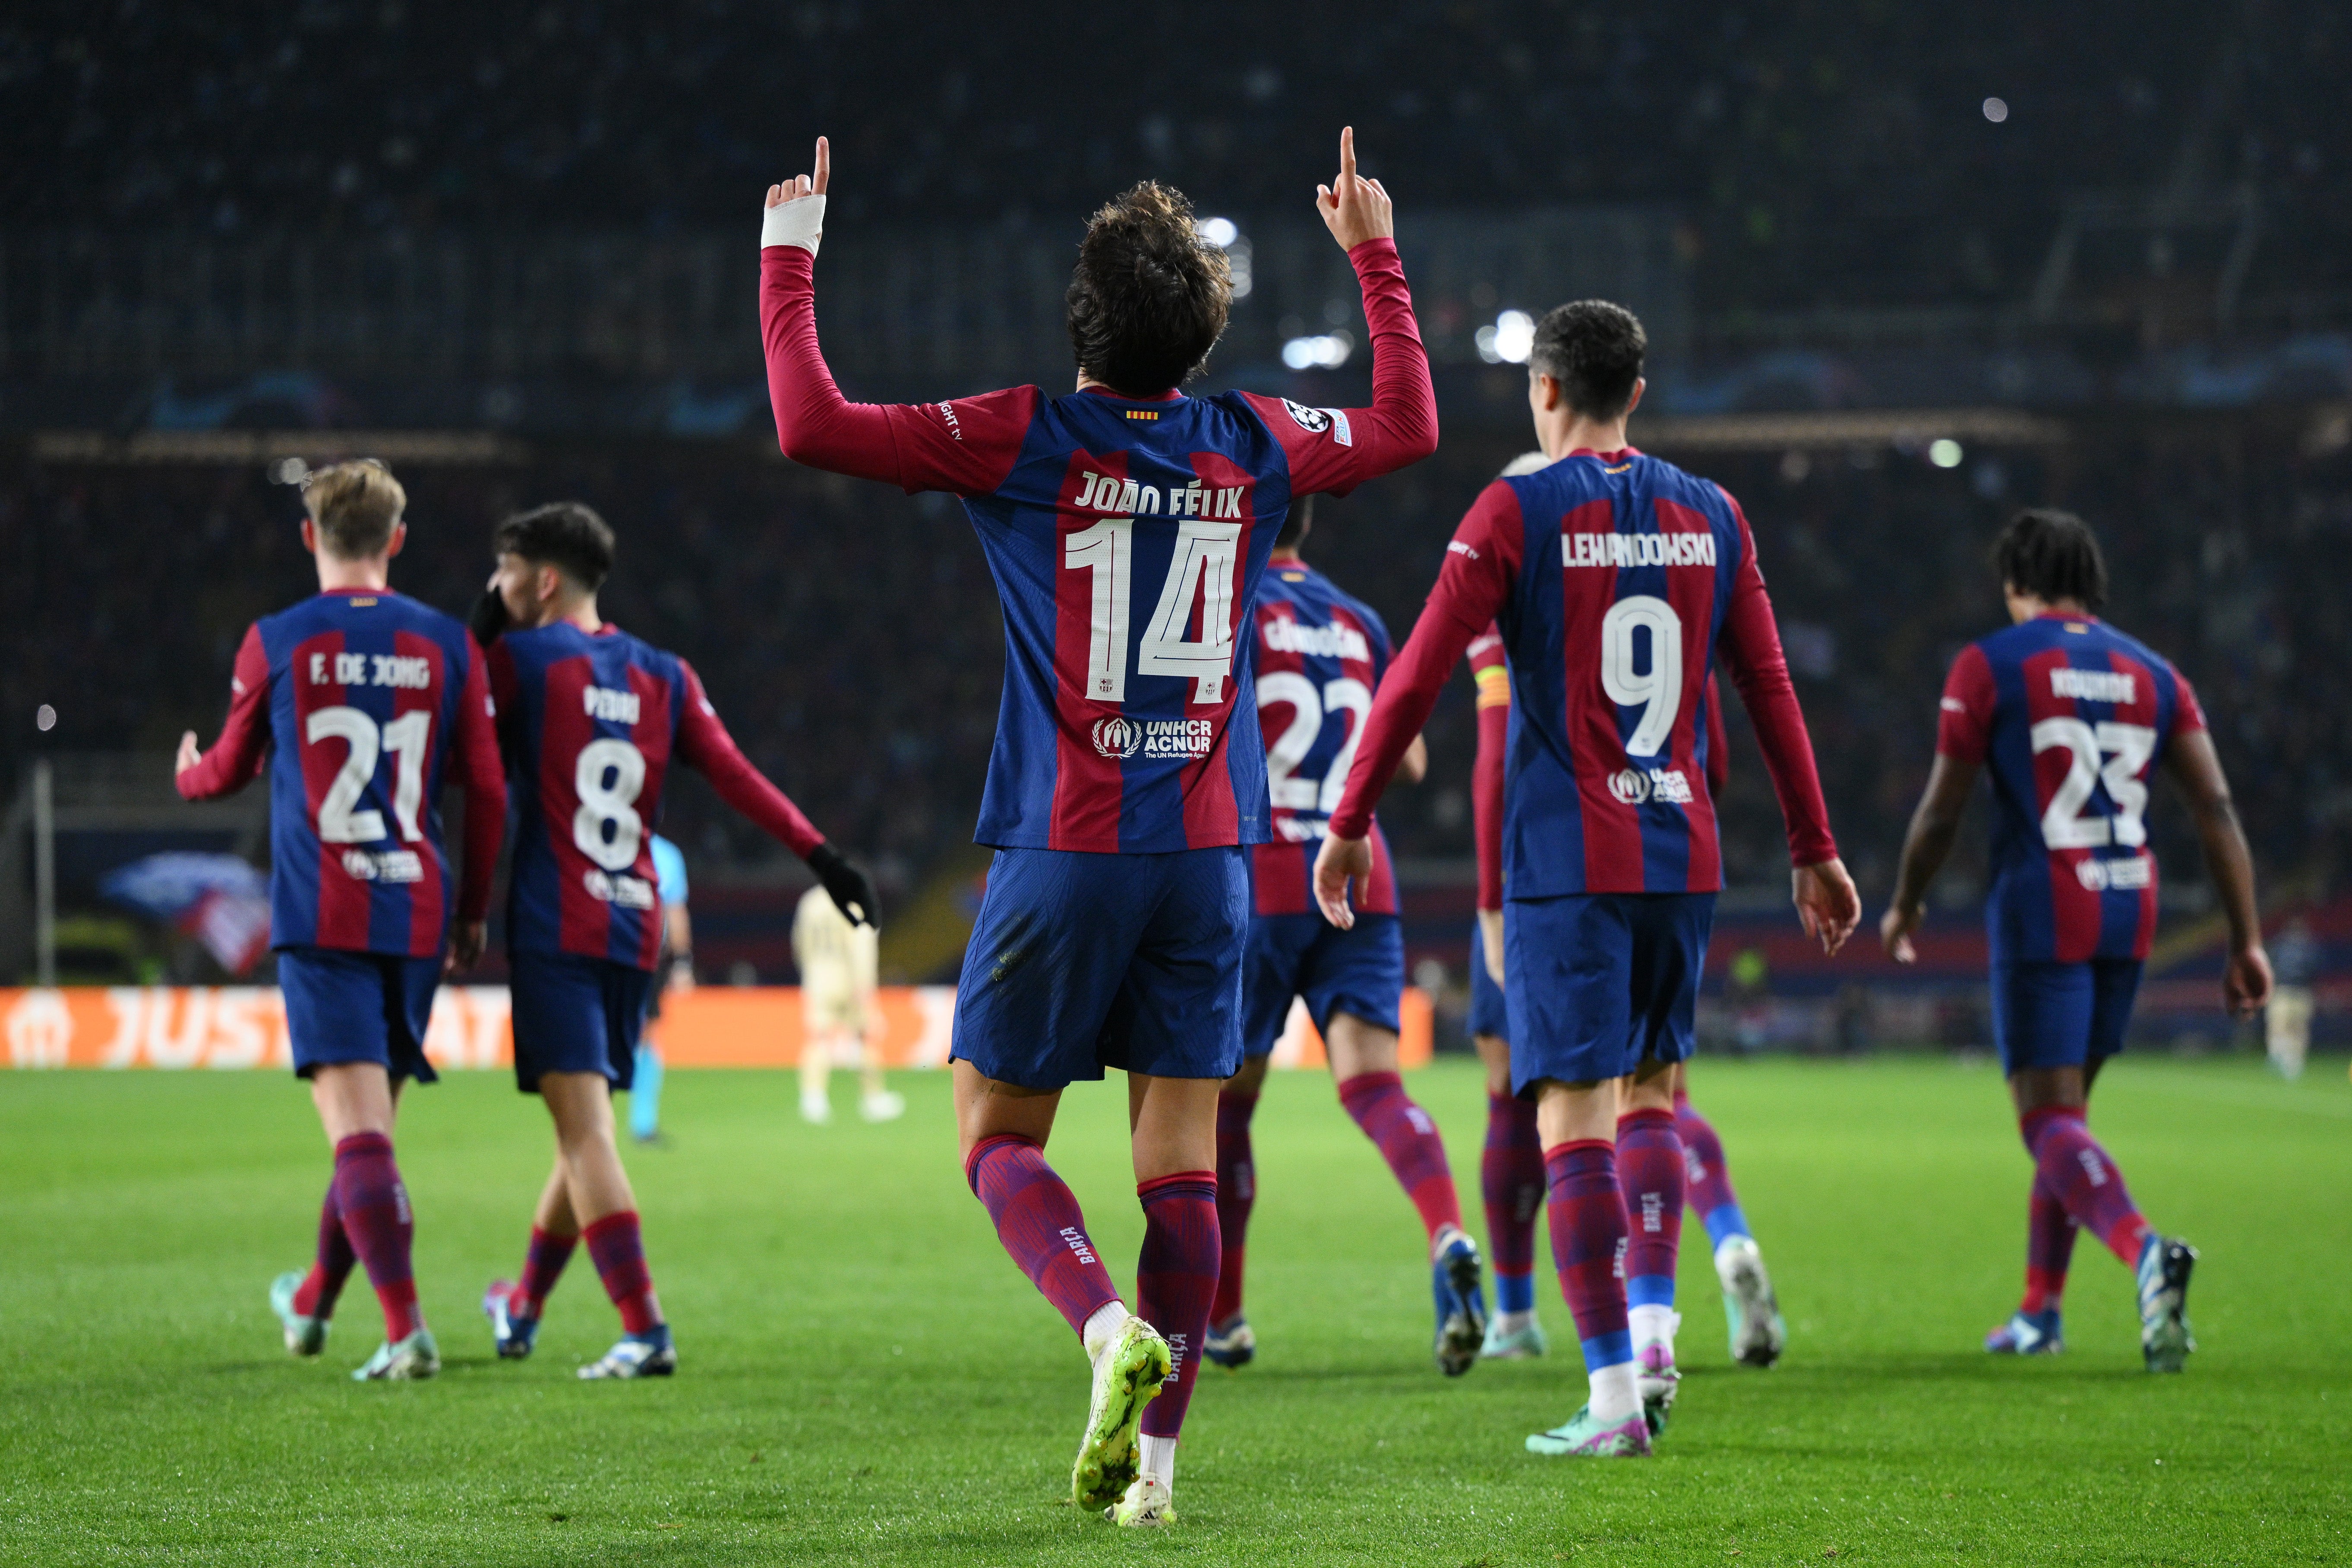 Barcelona secured their place in the Champions League knockout stages on Tuesday